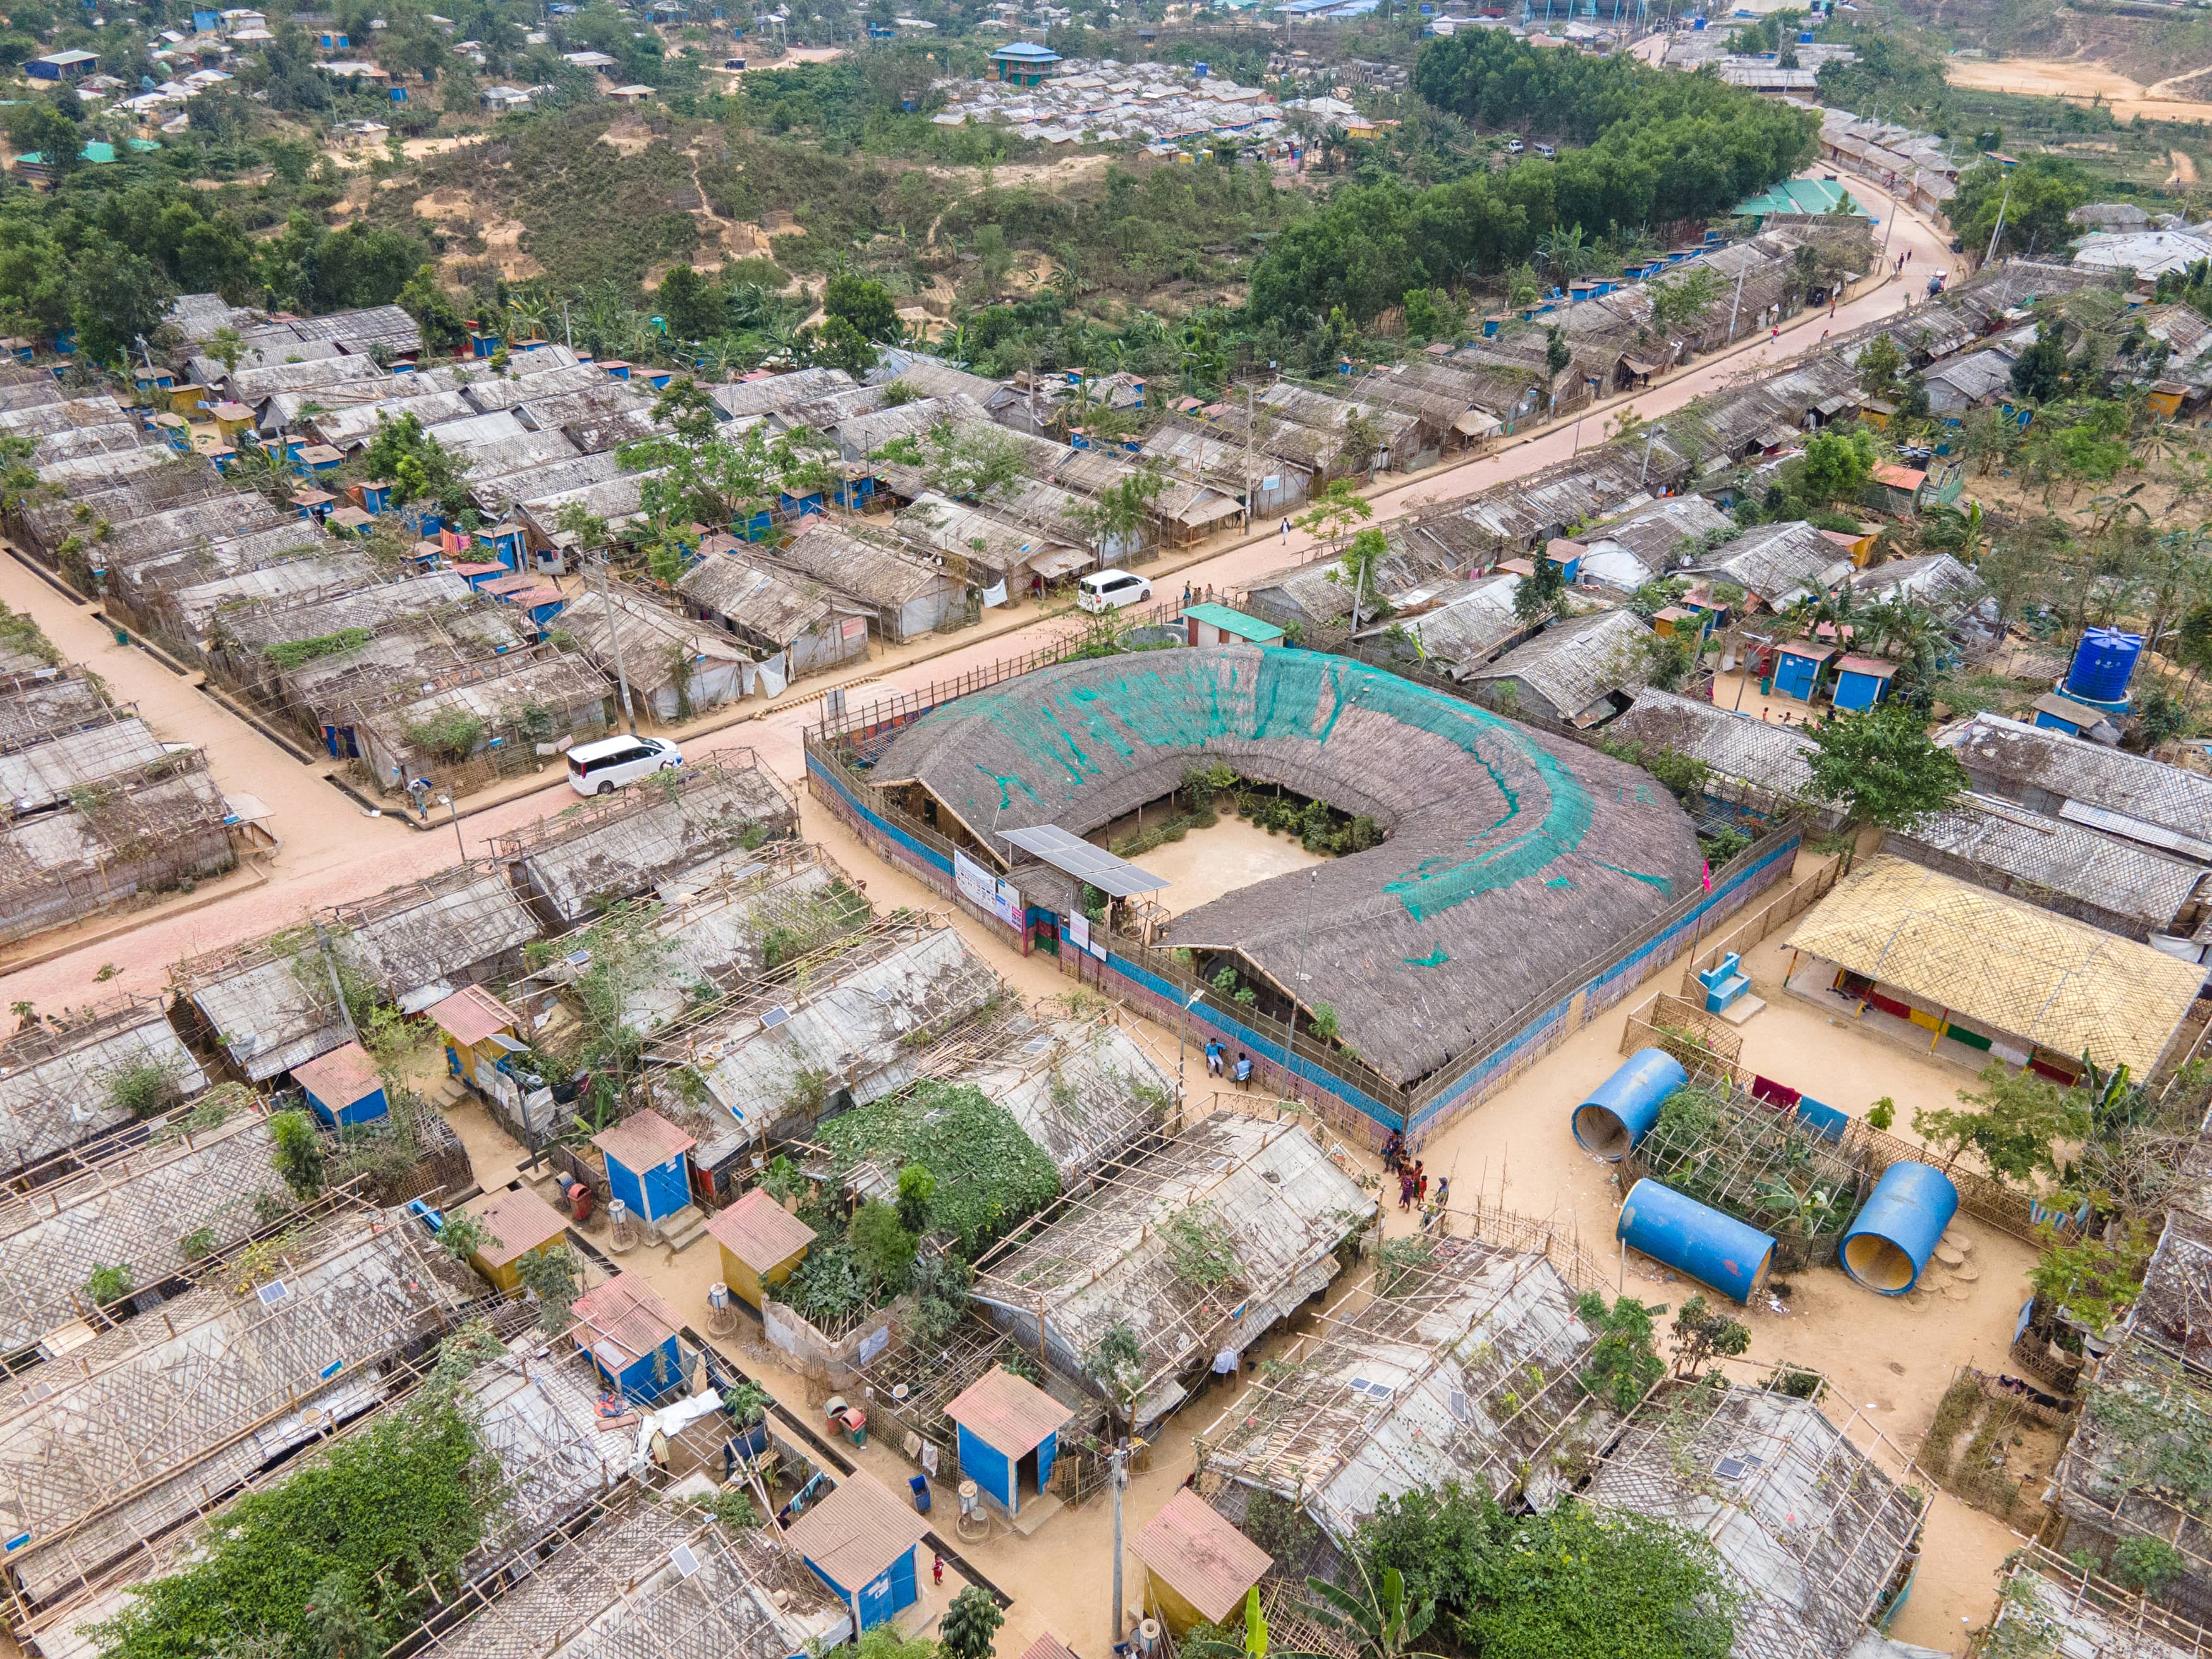 Community Spaces in Rohingya Refugee Response - Aga Khan Award for Architecture 2022